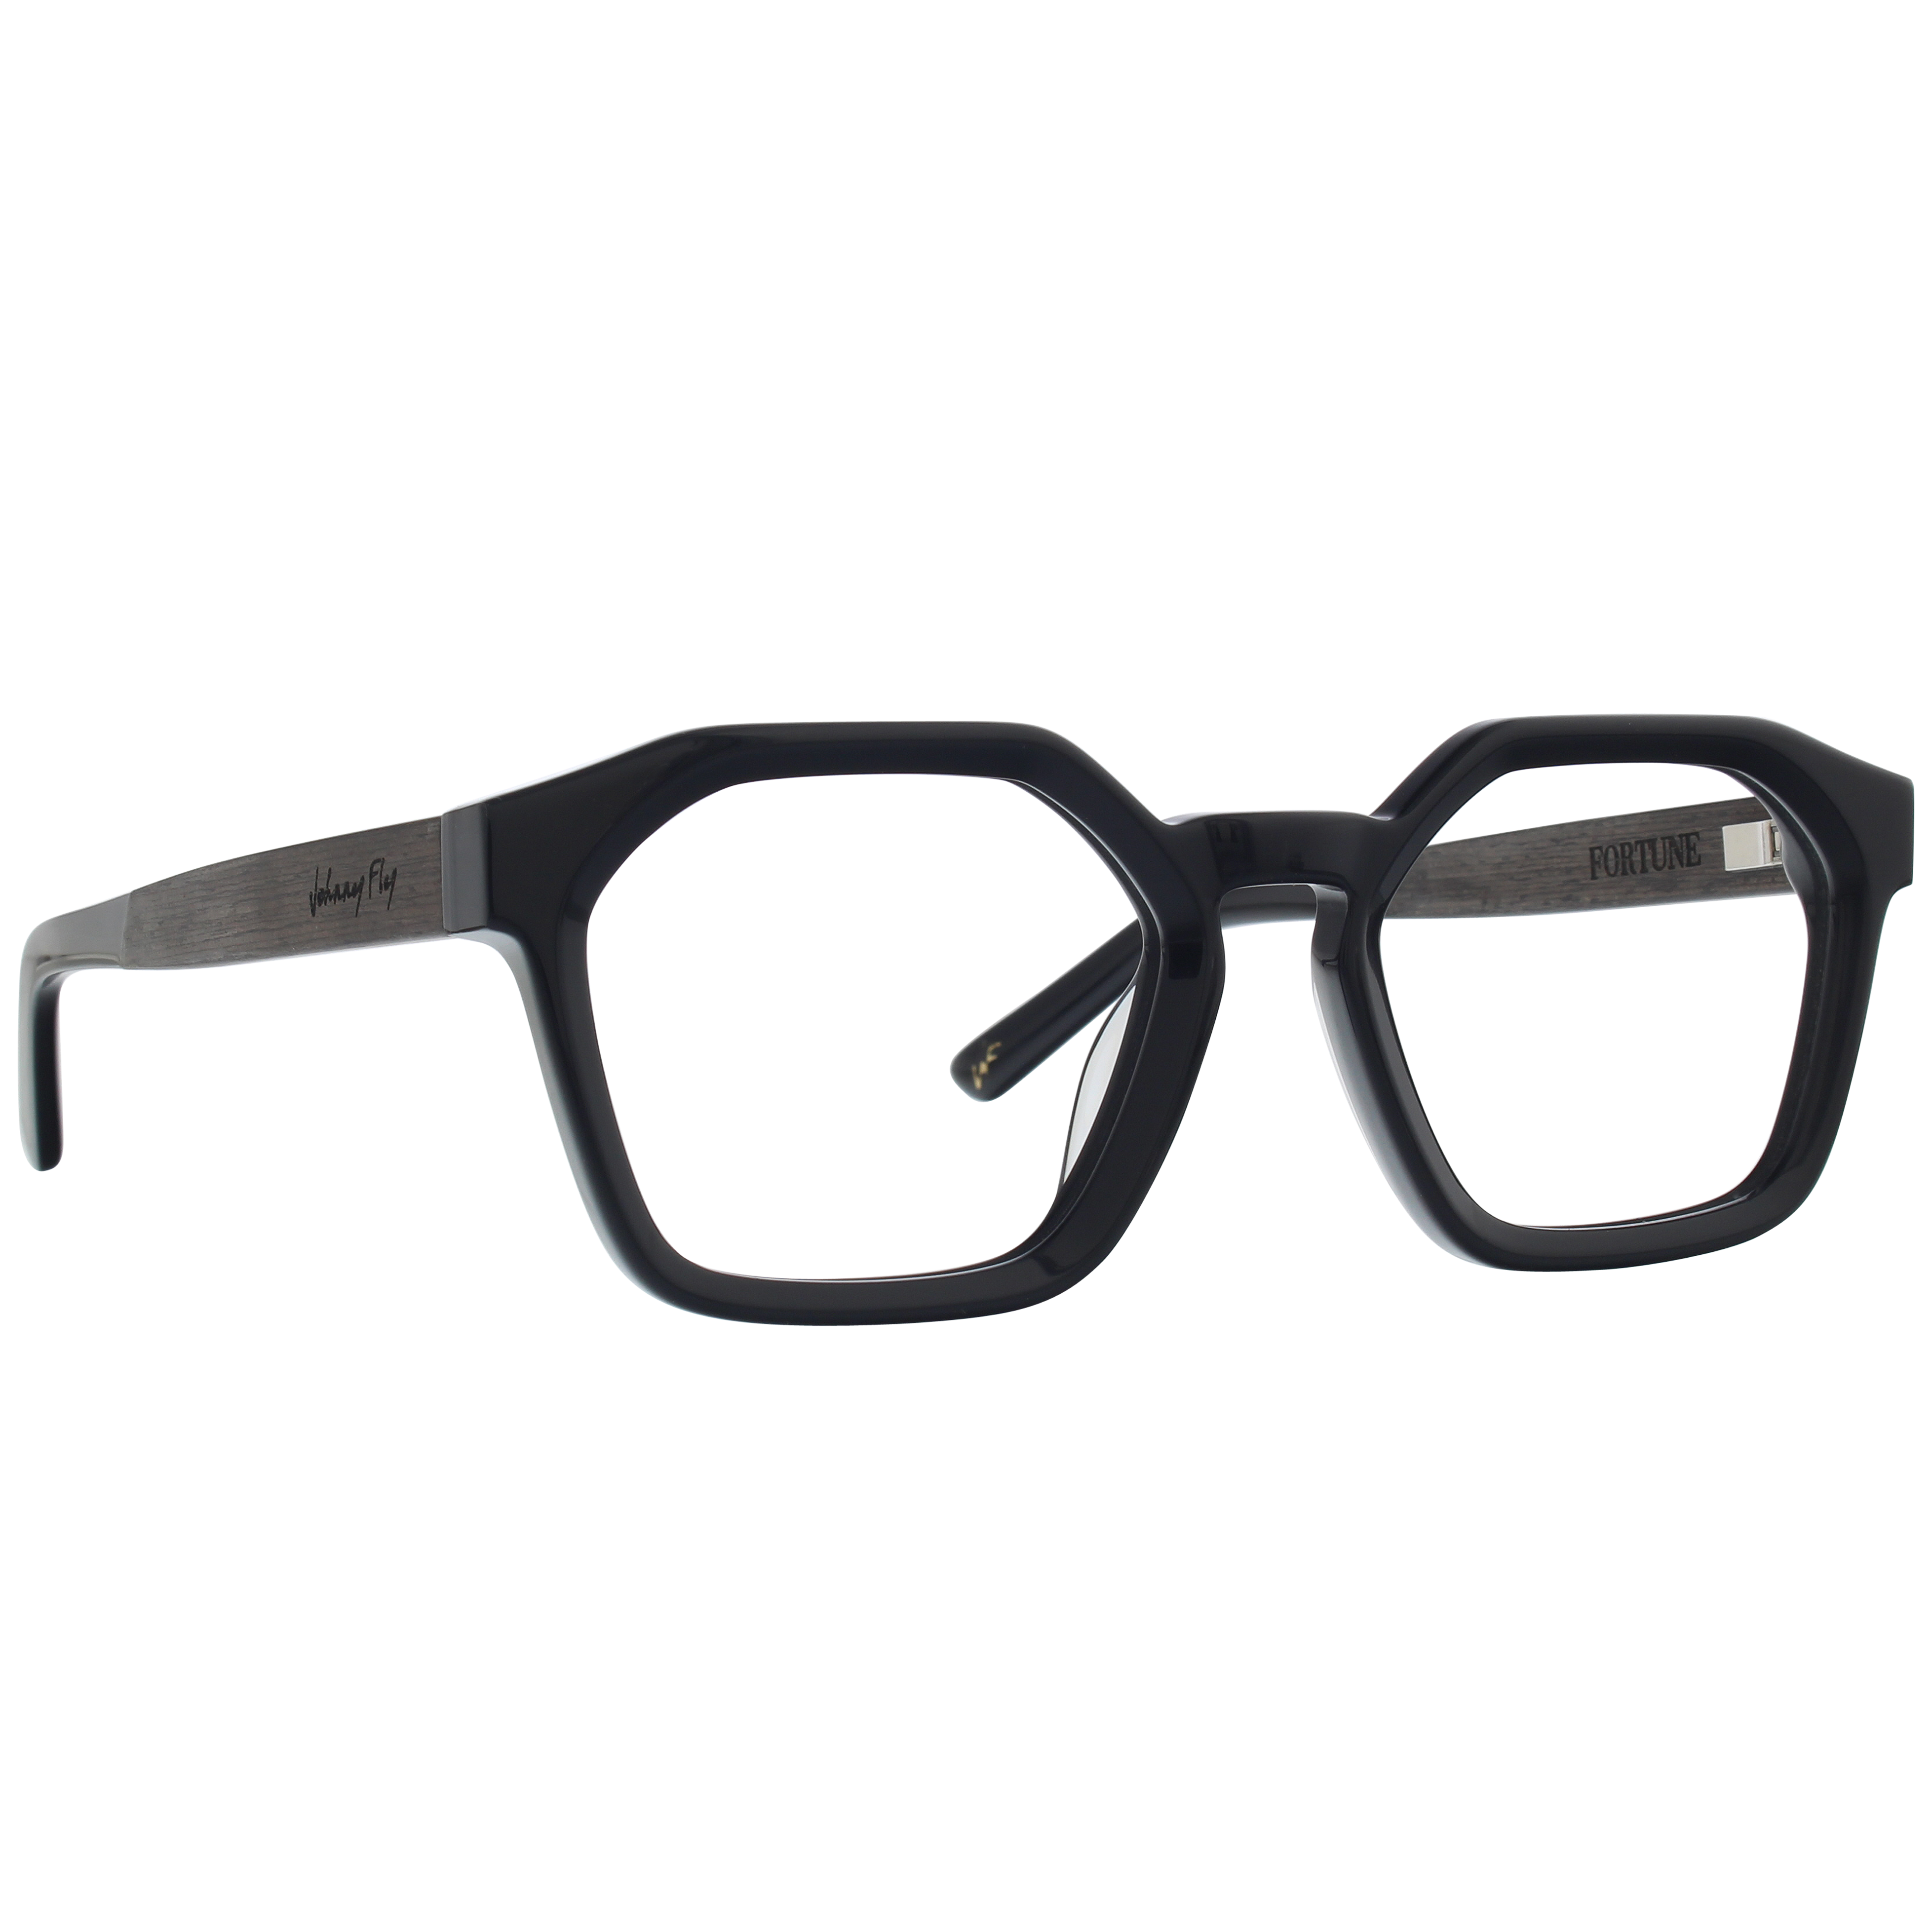 Fortune Bluelight Eyeglasses by Johnny Fly #color_gloss-black